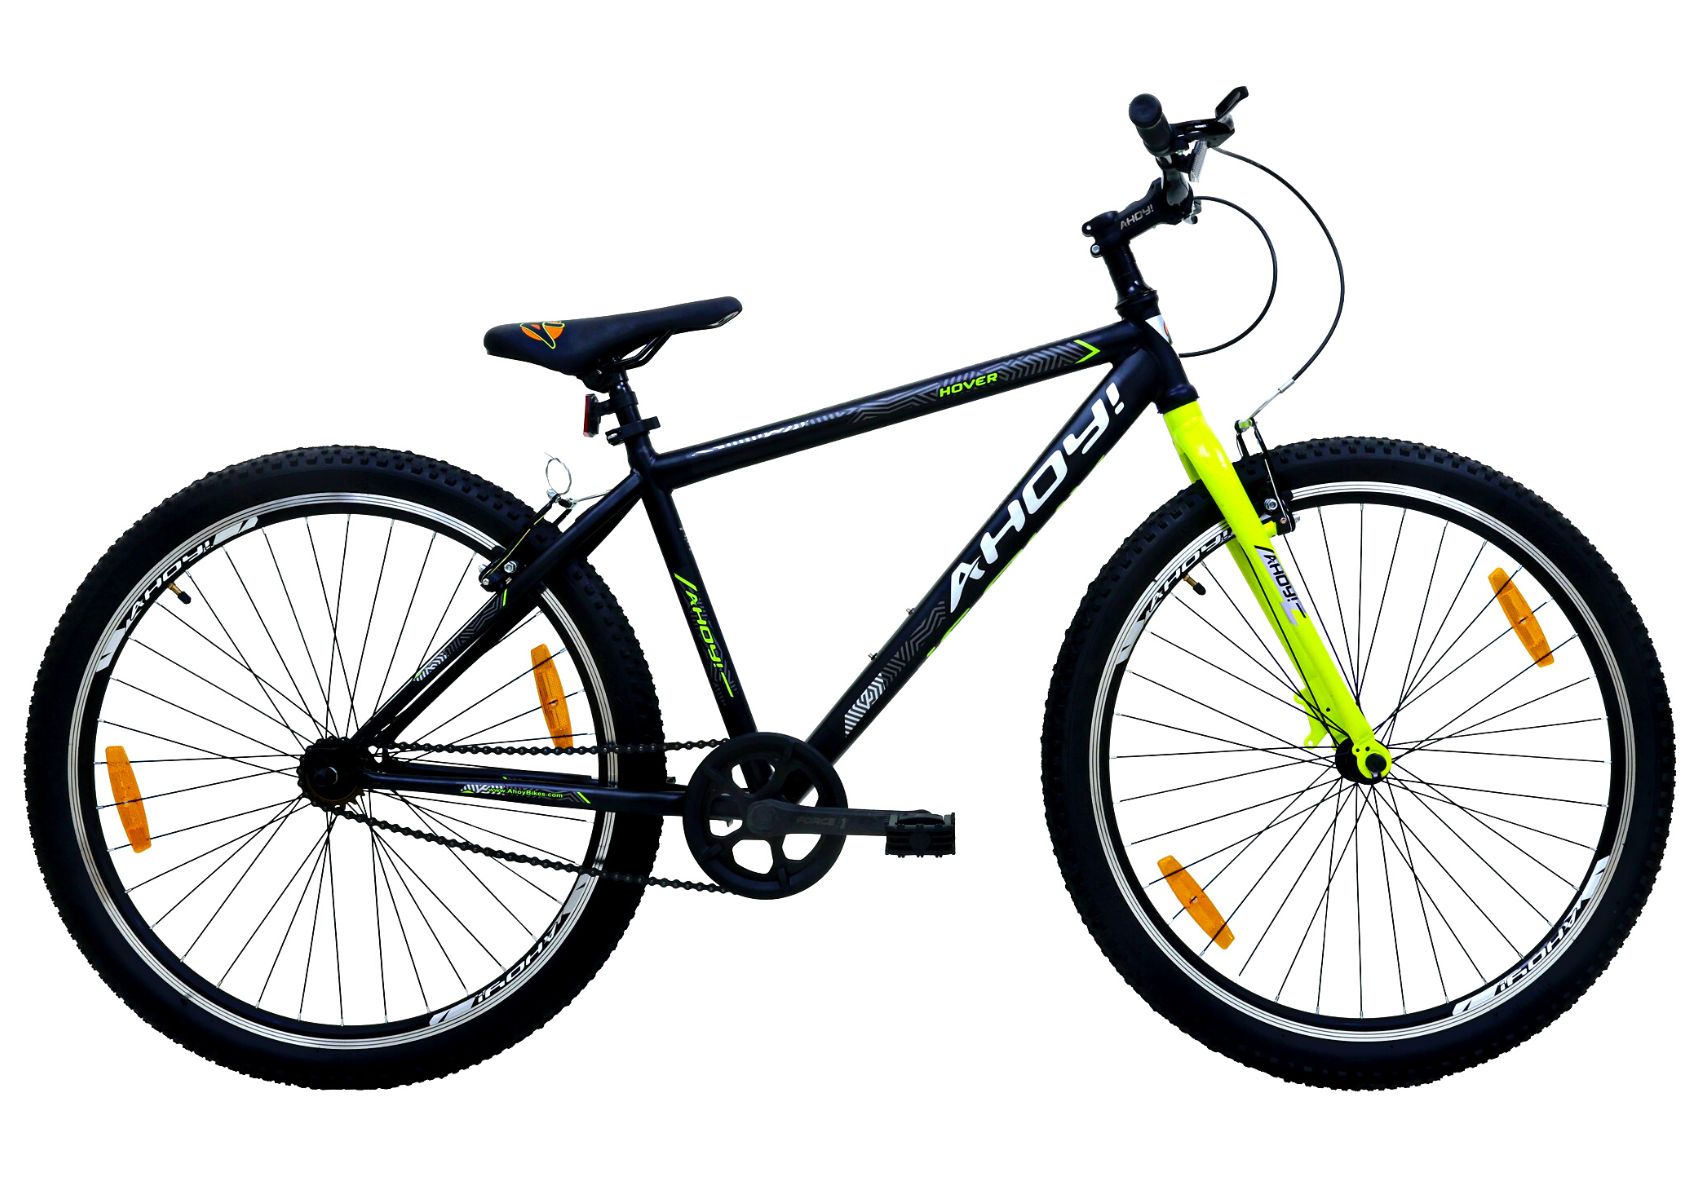 Hover All Terrain Bike 29T | Buy Yellow Non Gear Cycle for Men